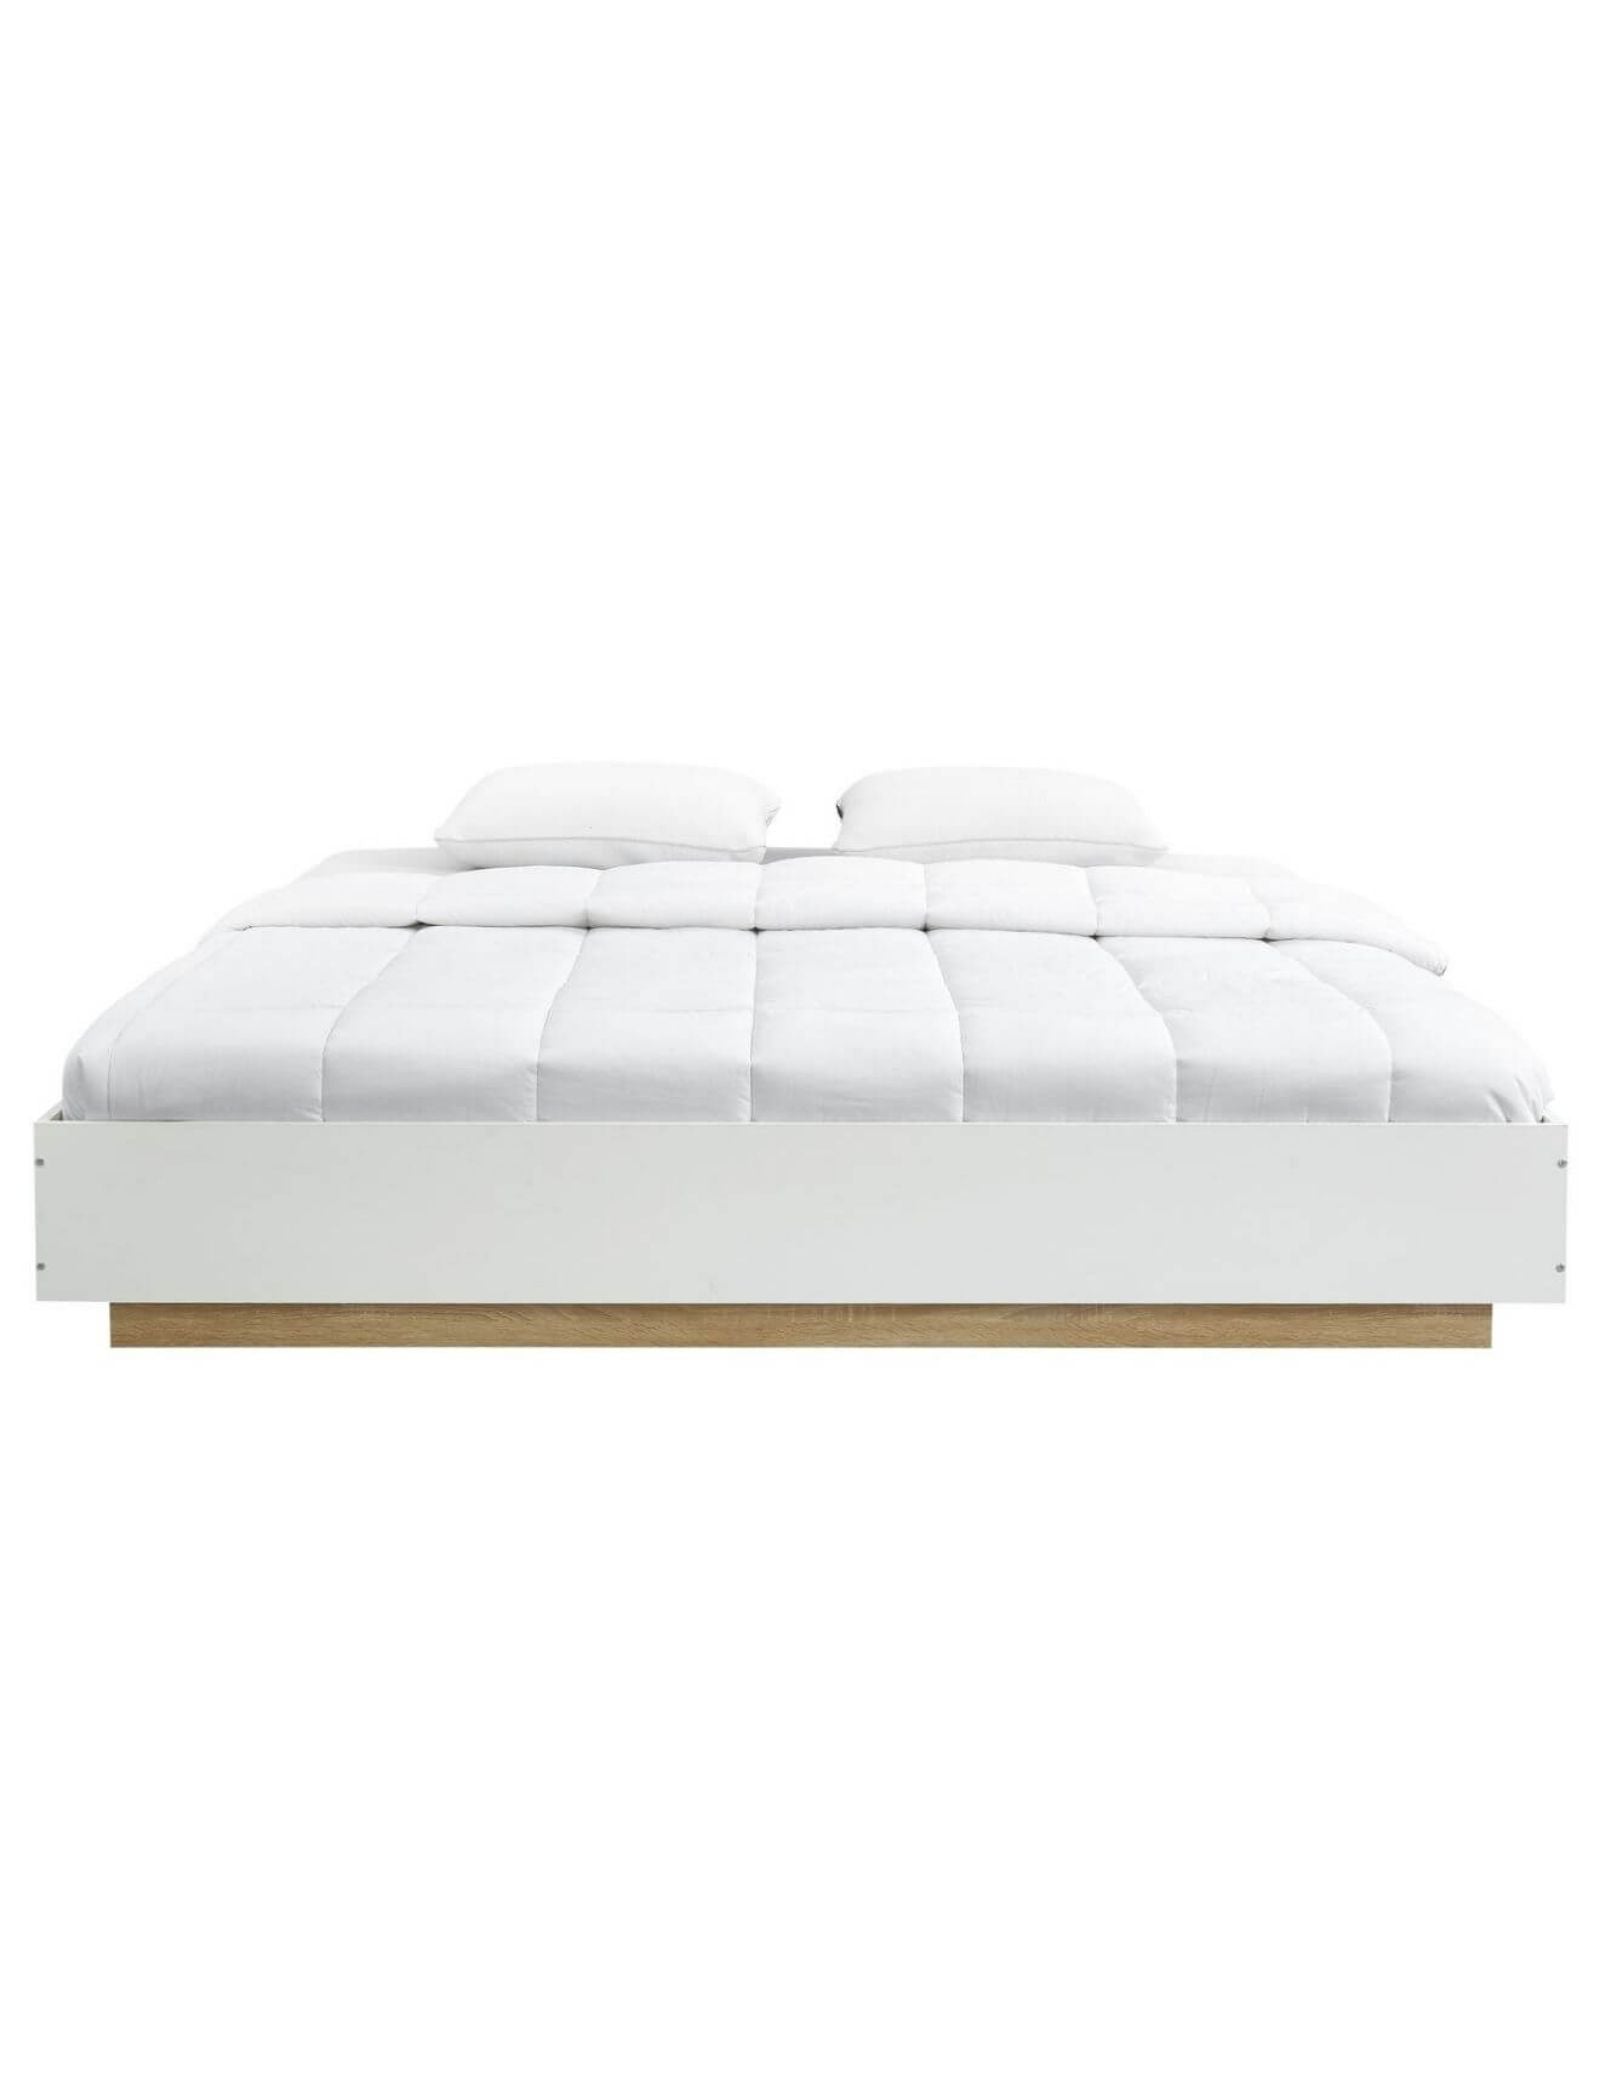 Aiden Industrial Contemporary White Oak Bed Base Bedframe - ozily